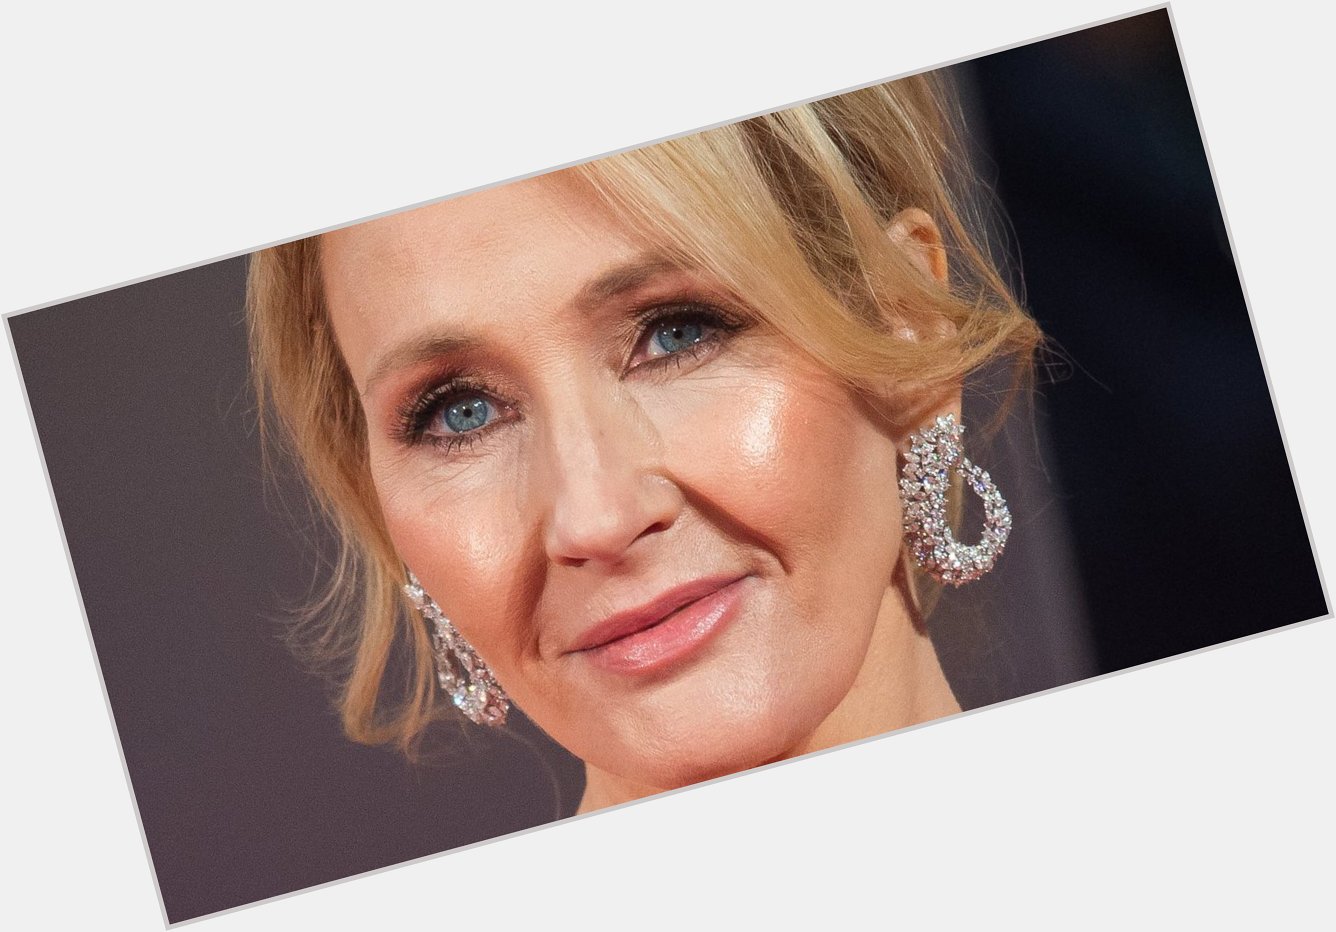 Fans wish J.K. Rowling a happy birthday and thank her for the magic  